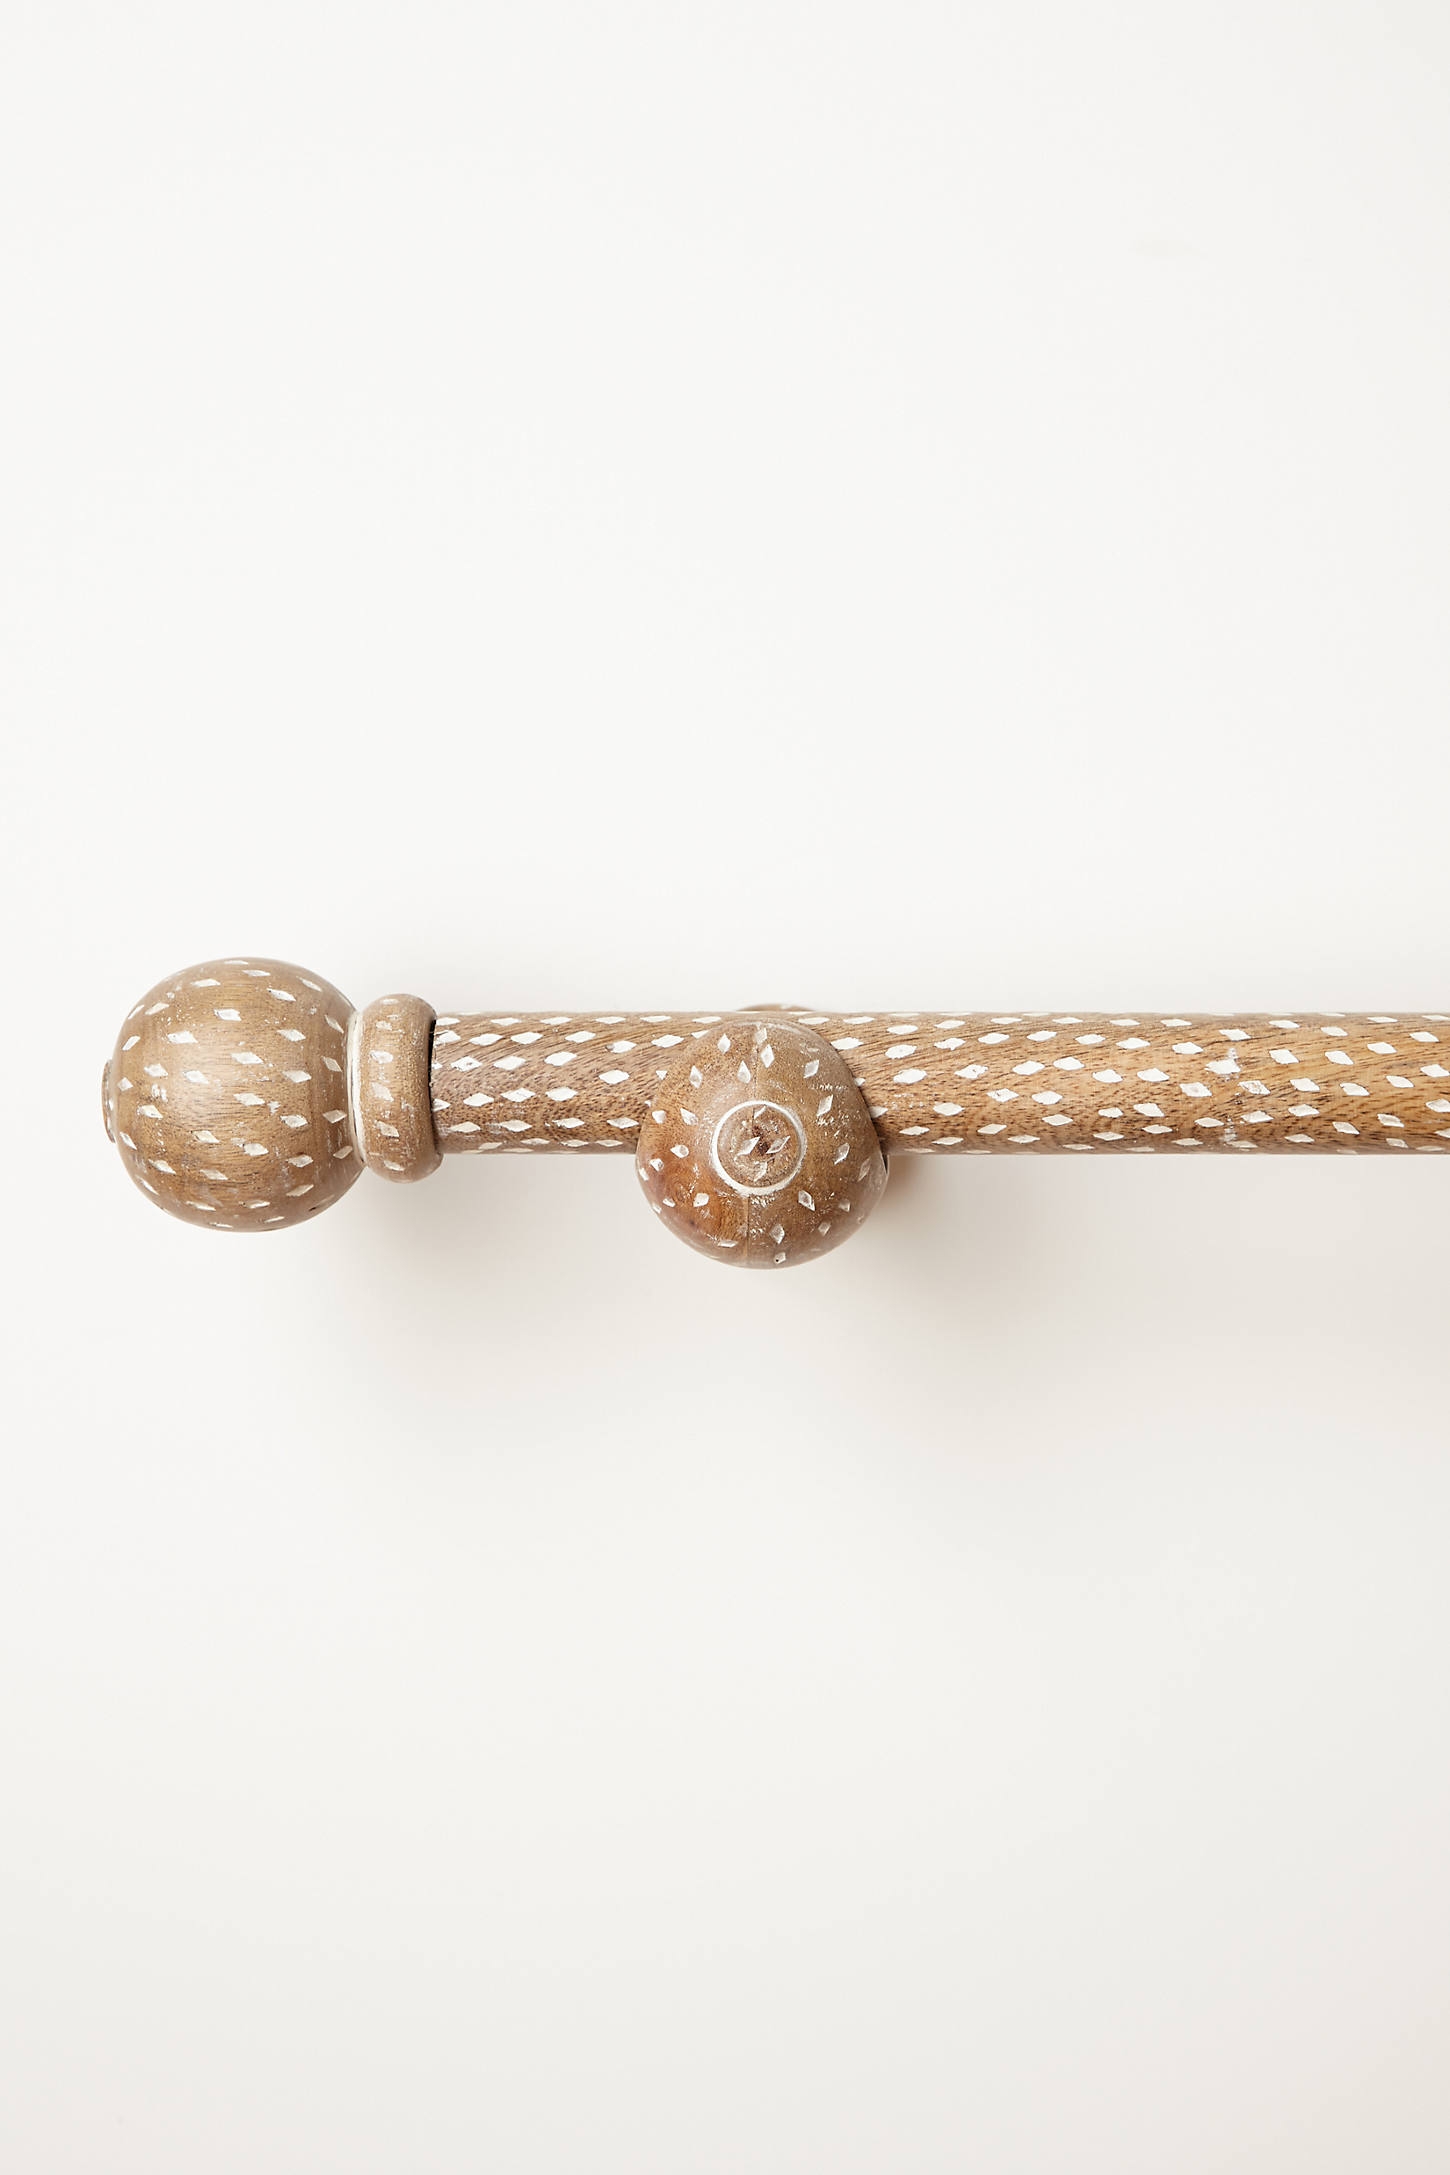 Speckled Wood Curtain Rod - Image 0